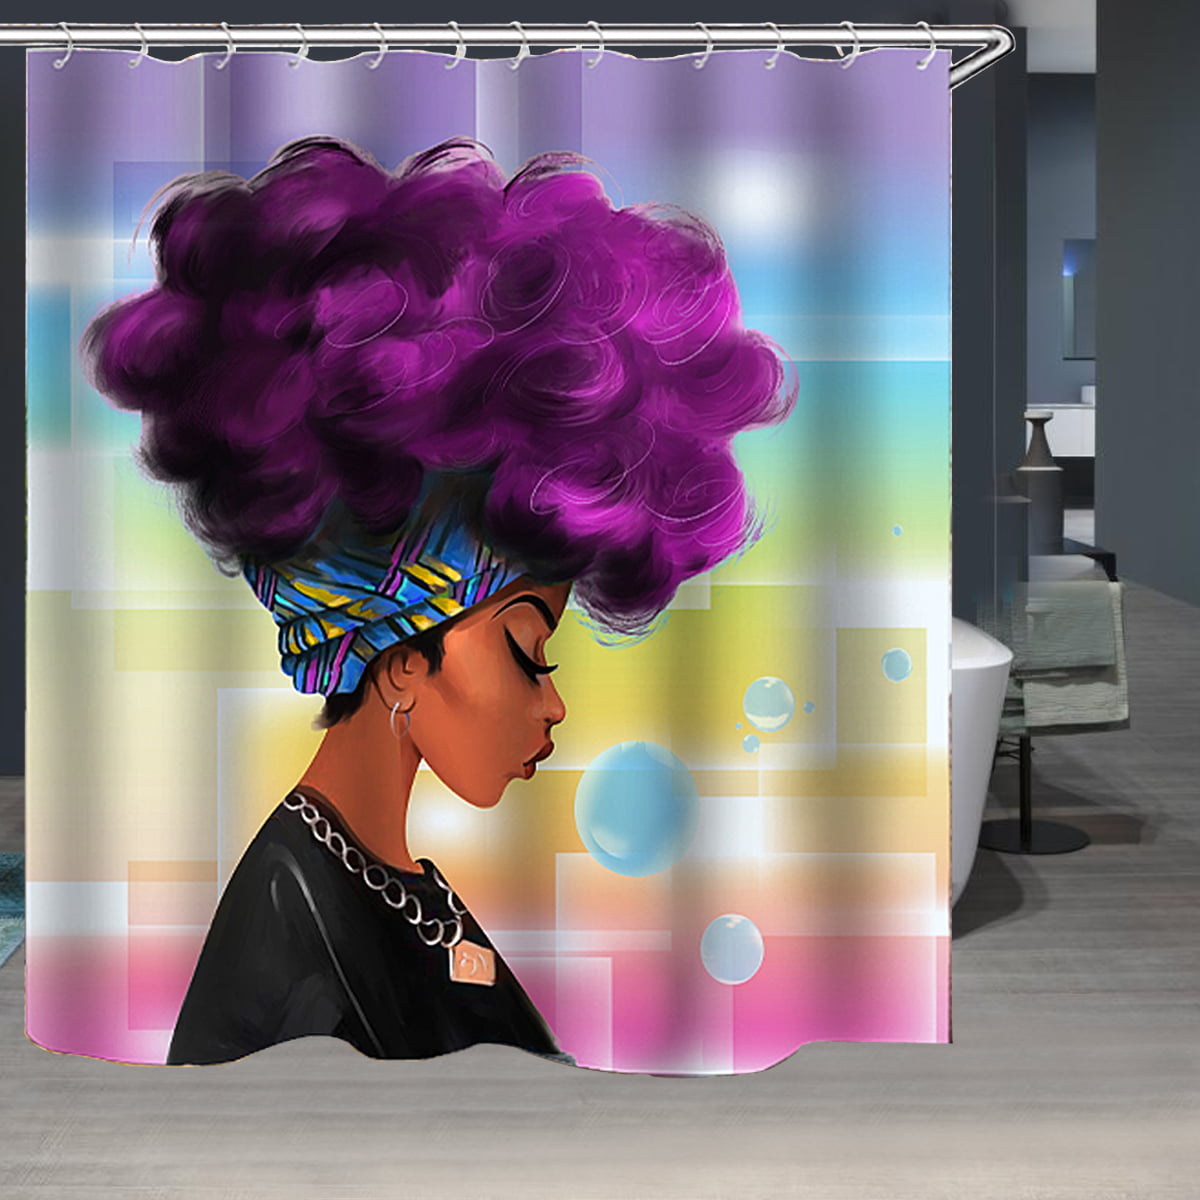 Black Girl Purple Afro Hair Black Shirt Bubble Colorful Background Black Girl Shower Curtain Decor 70 x 70 Inches Waterproof Mildew Resistant Polyester Fabric Machine Washable 12pcs Hooks